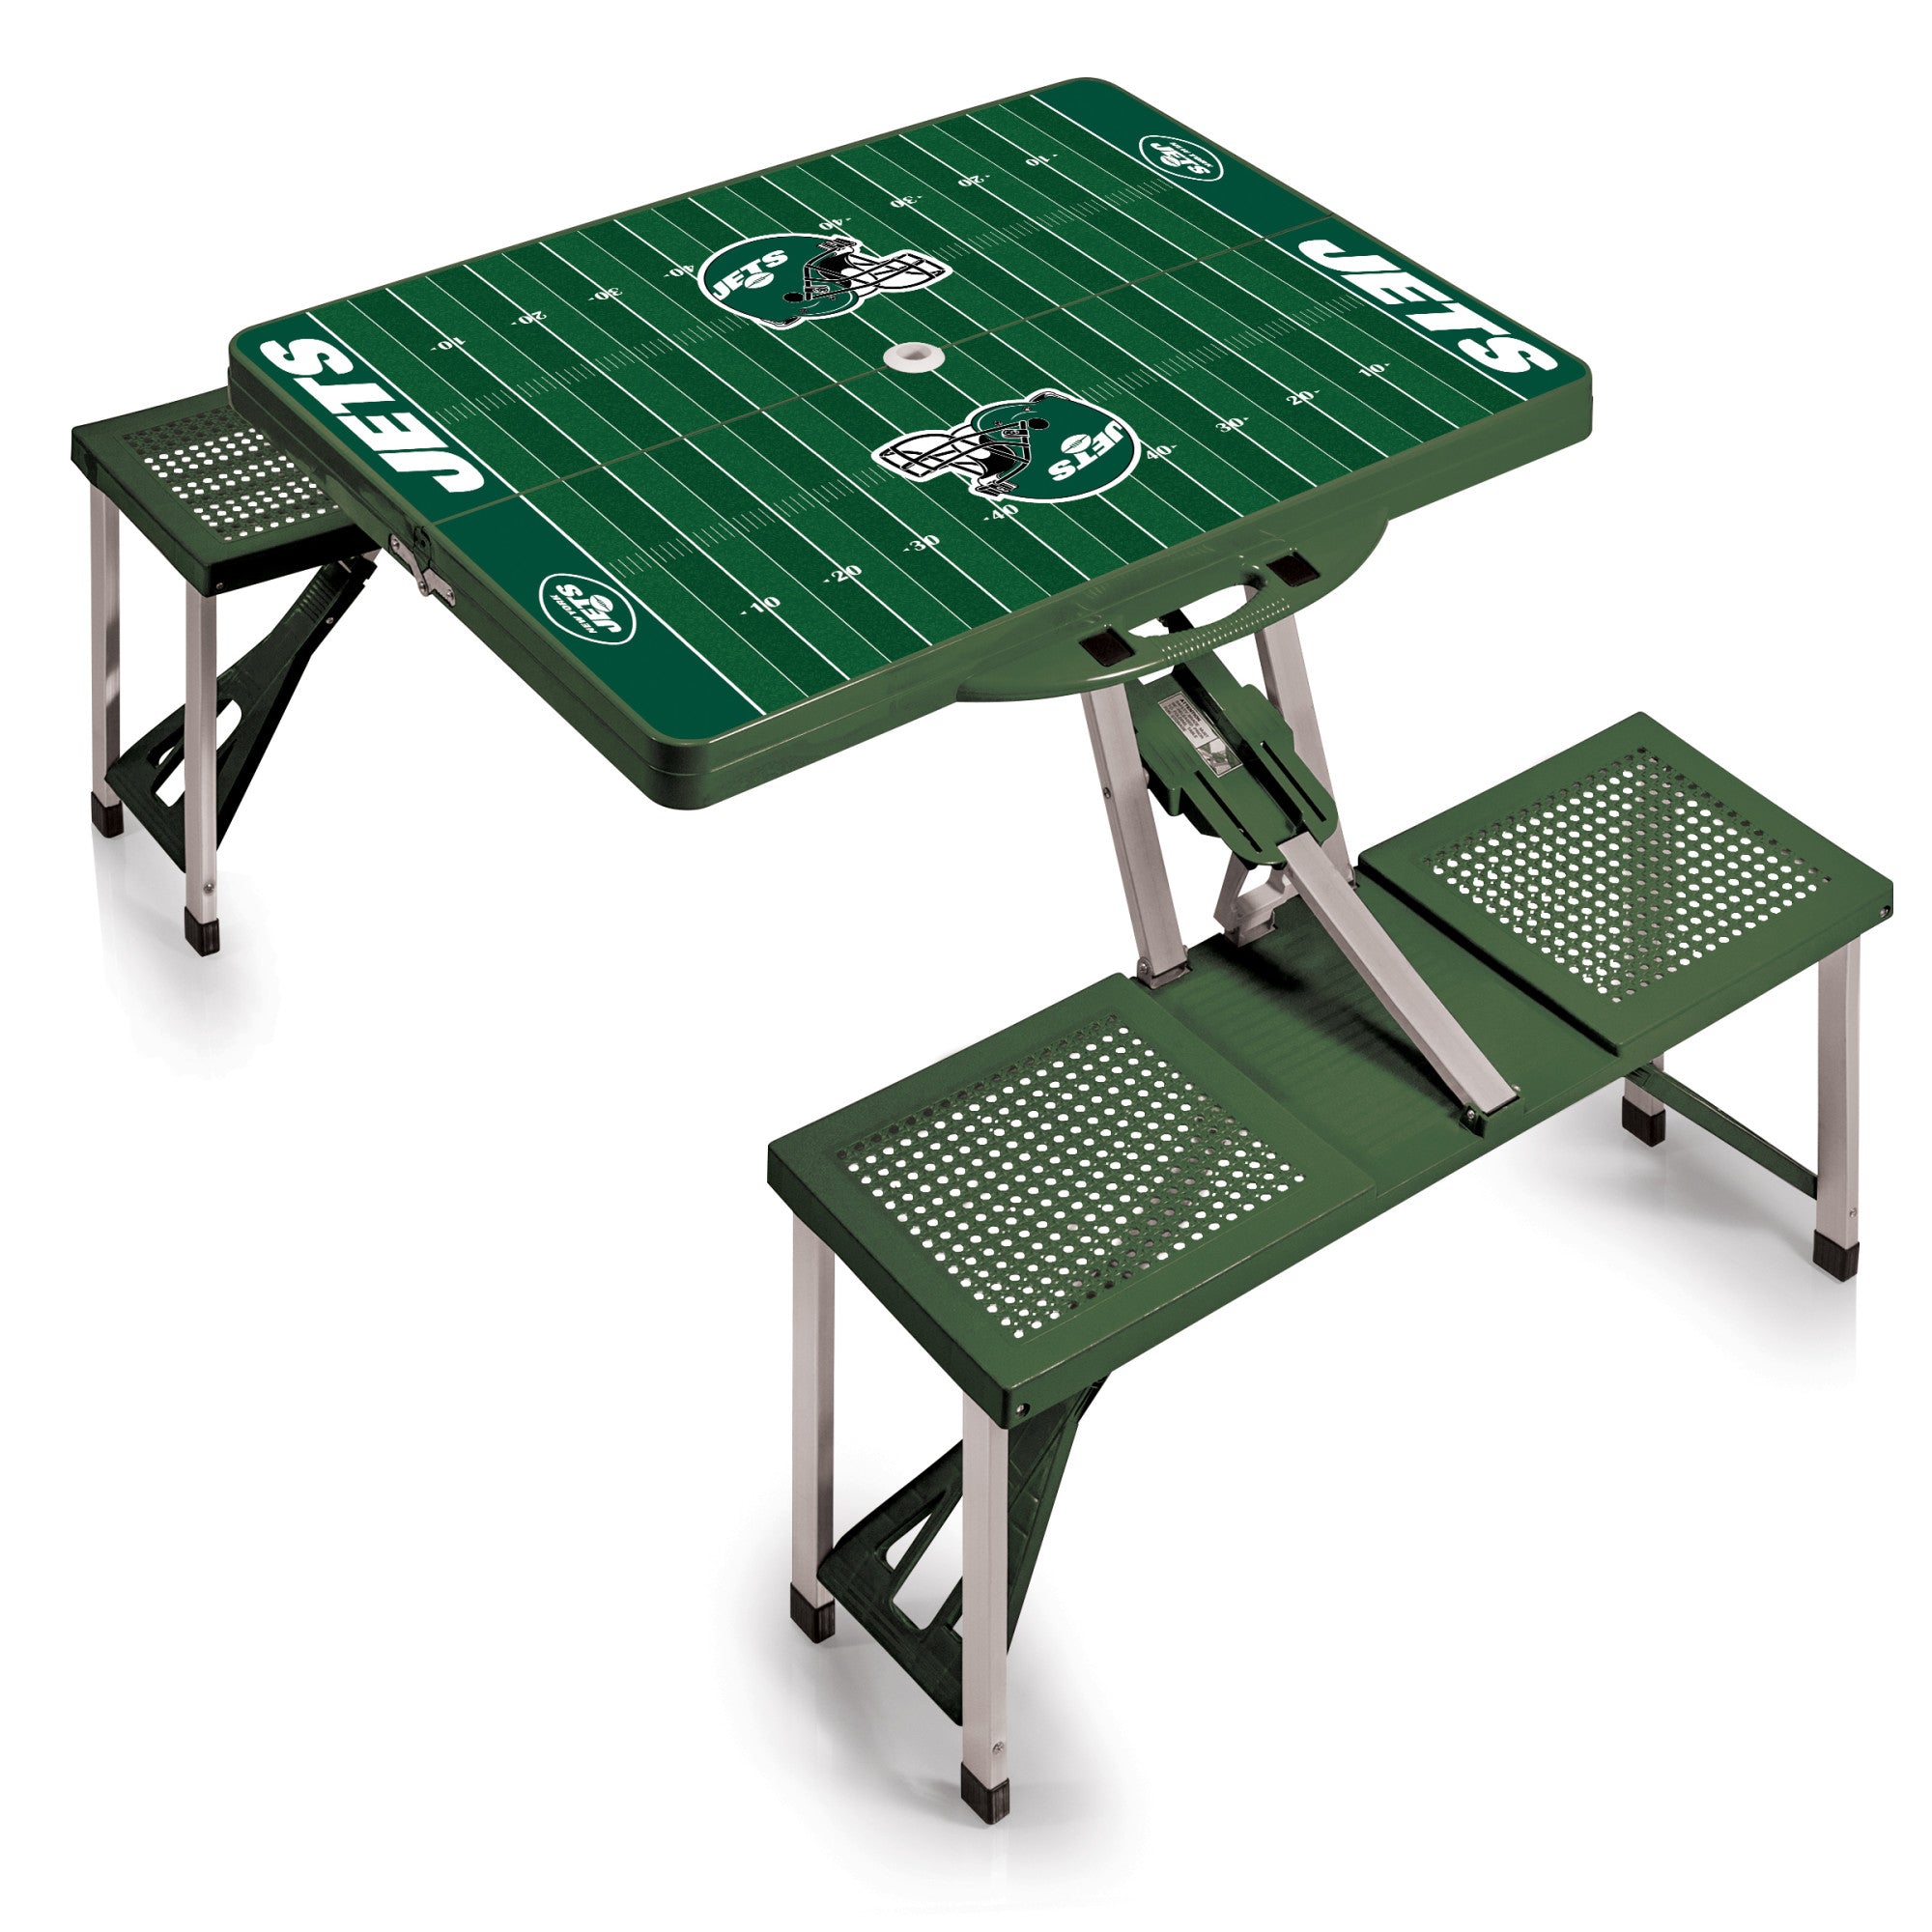 New York Jets Football Field - Picnic Table Portable Folding Table with Seats